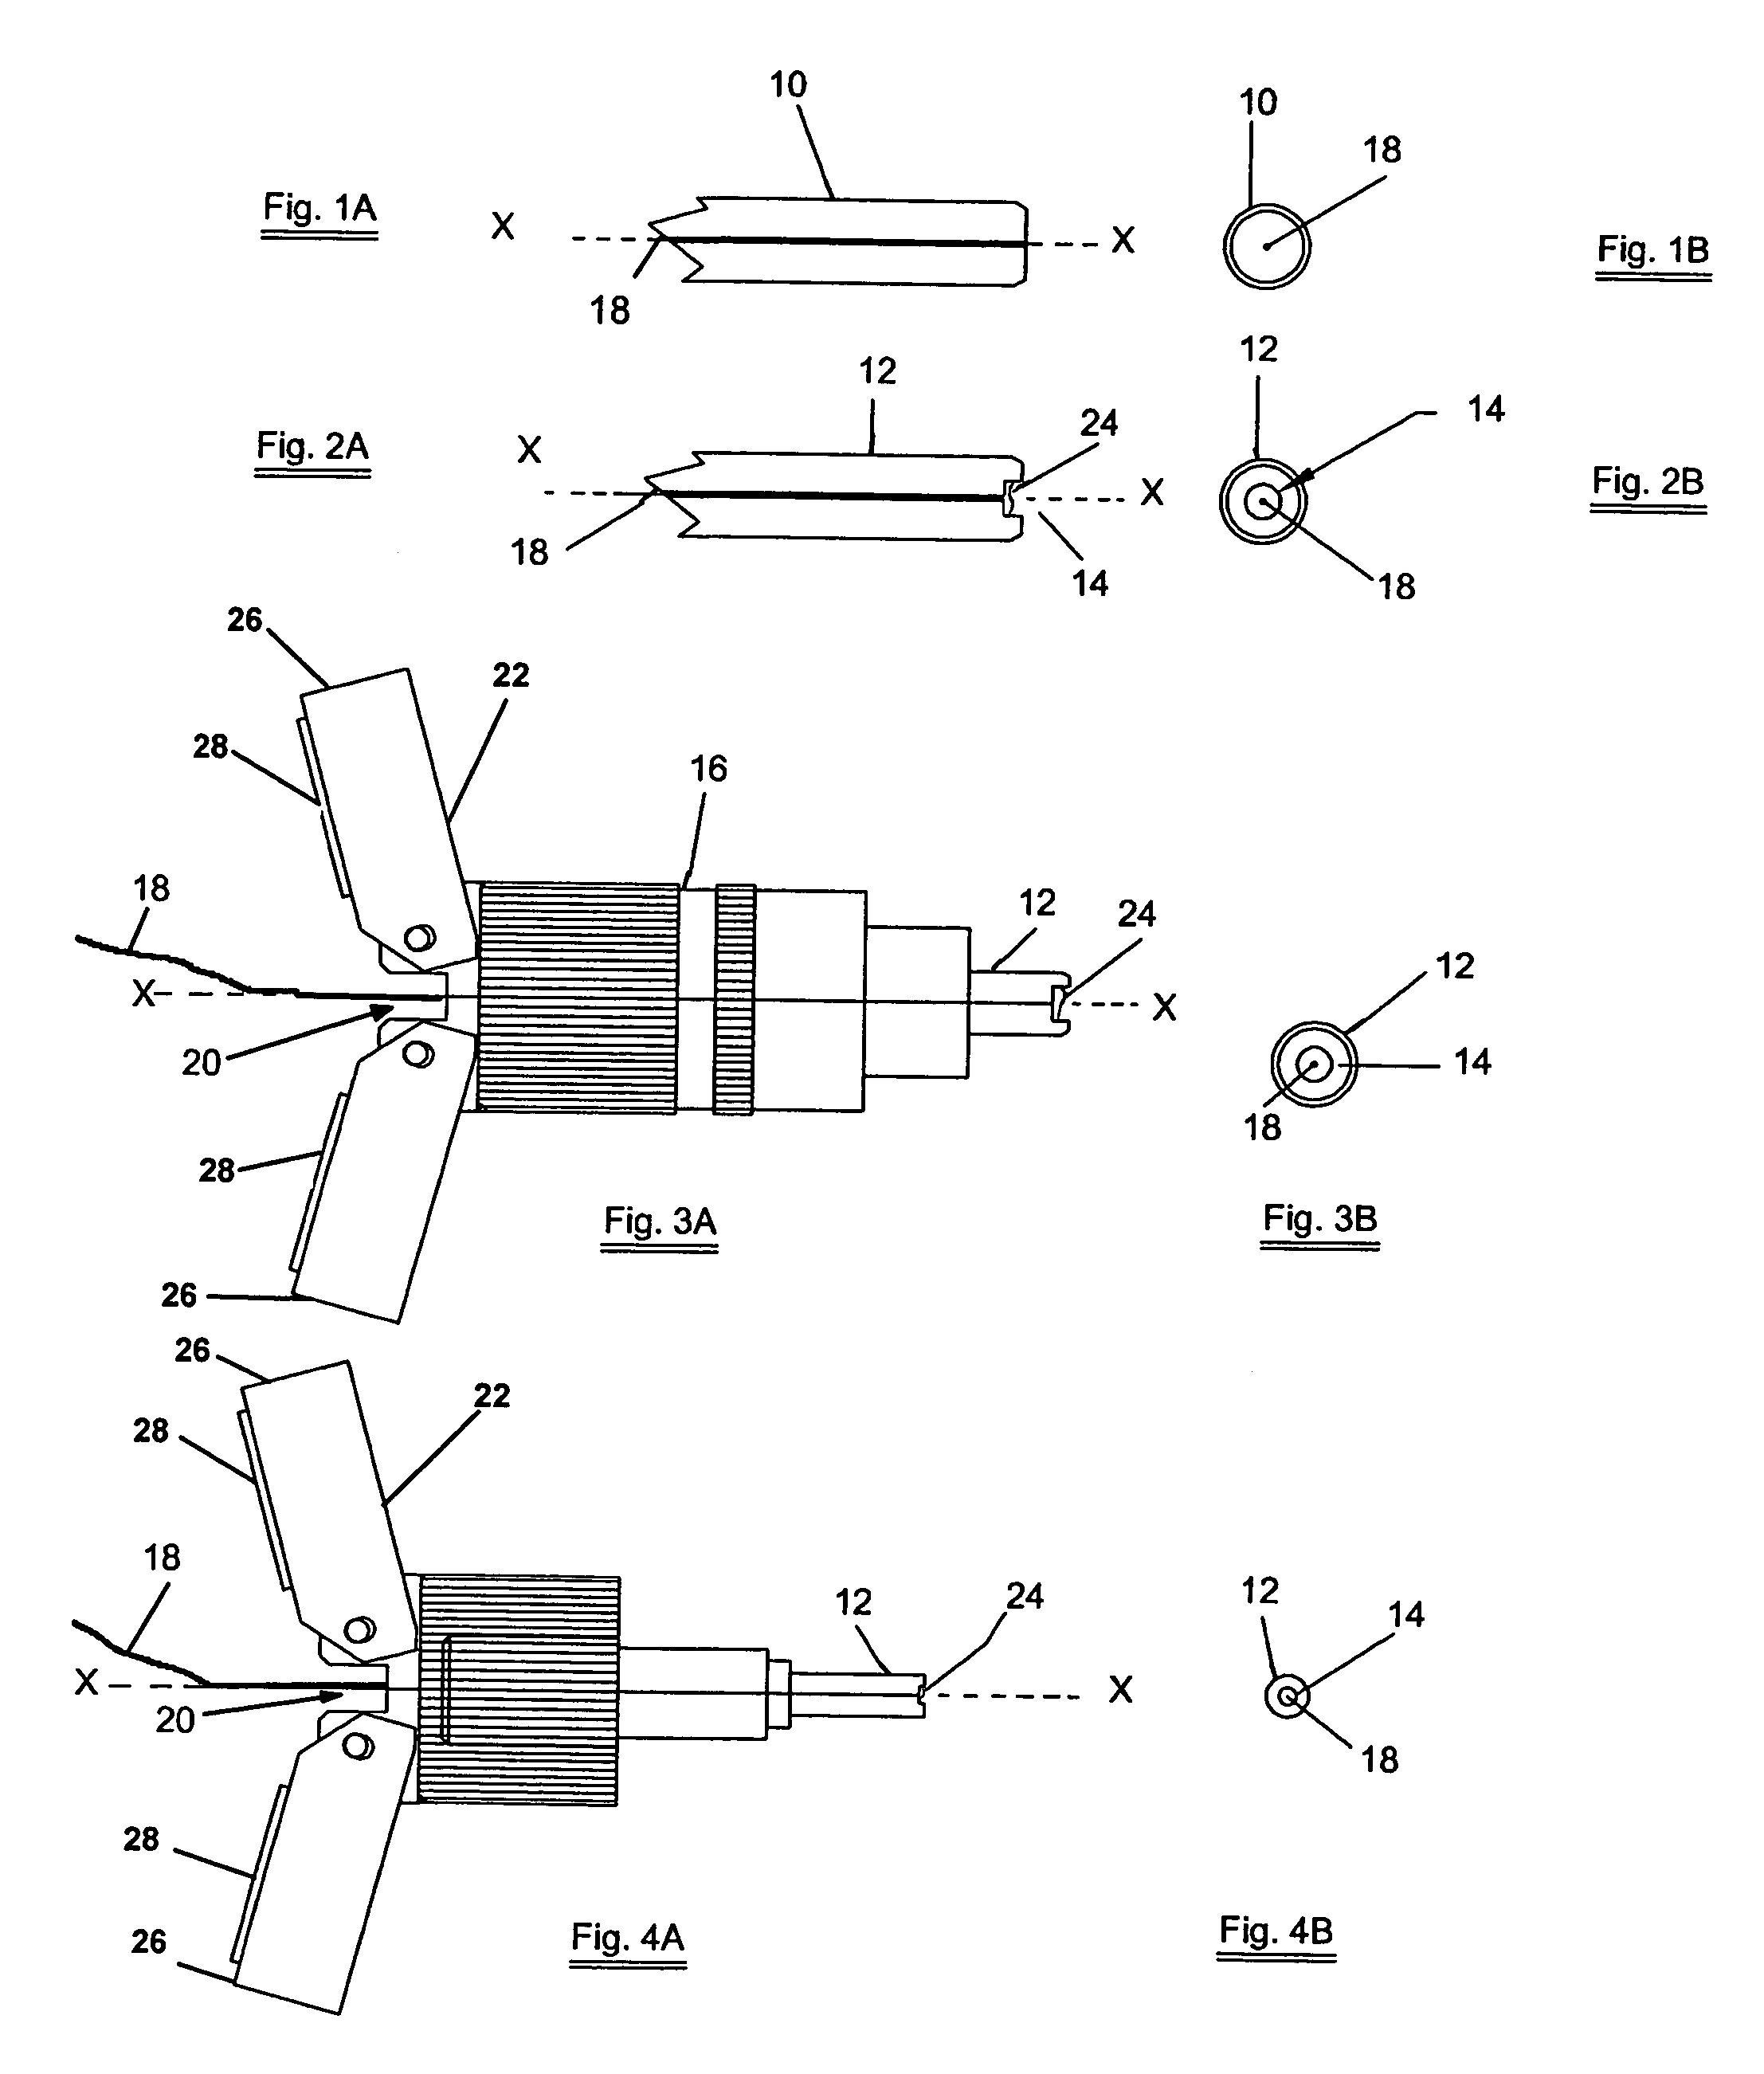 Bare fiber optical connecting devices